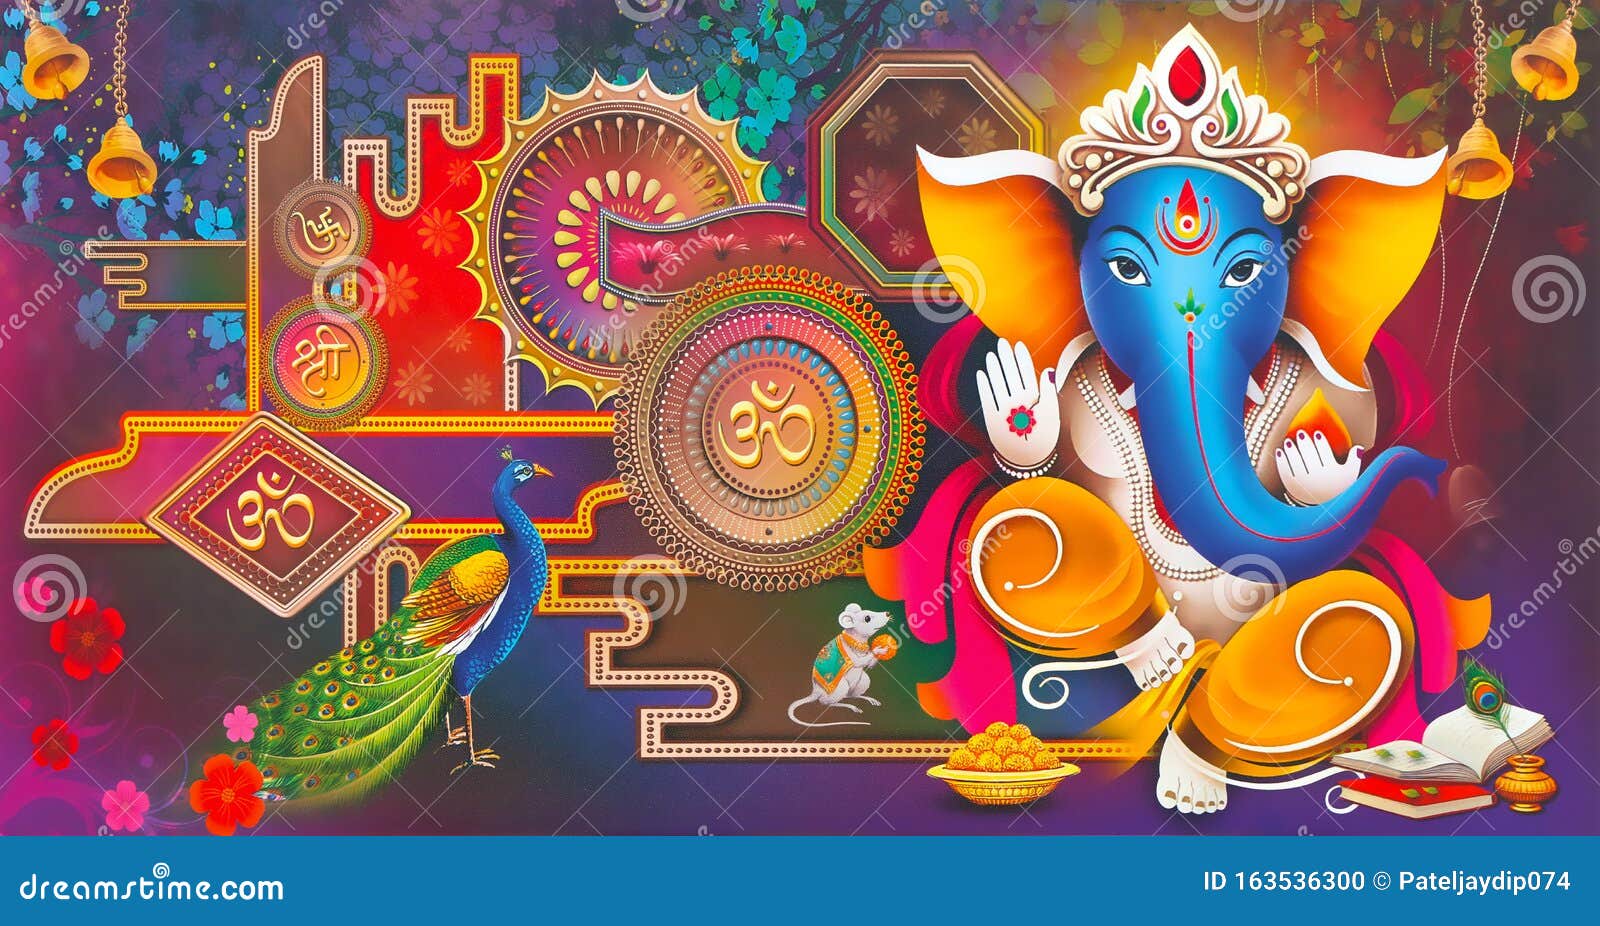 Lord Ganesh Live Wallpaper  Apps on Google Play